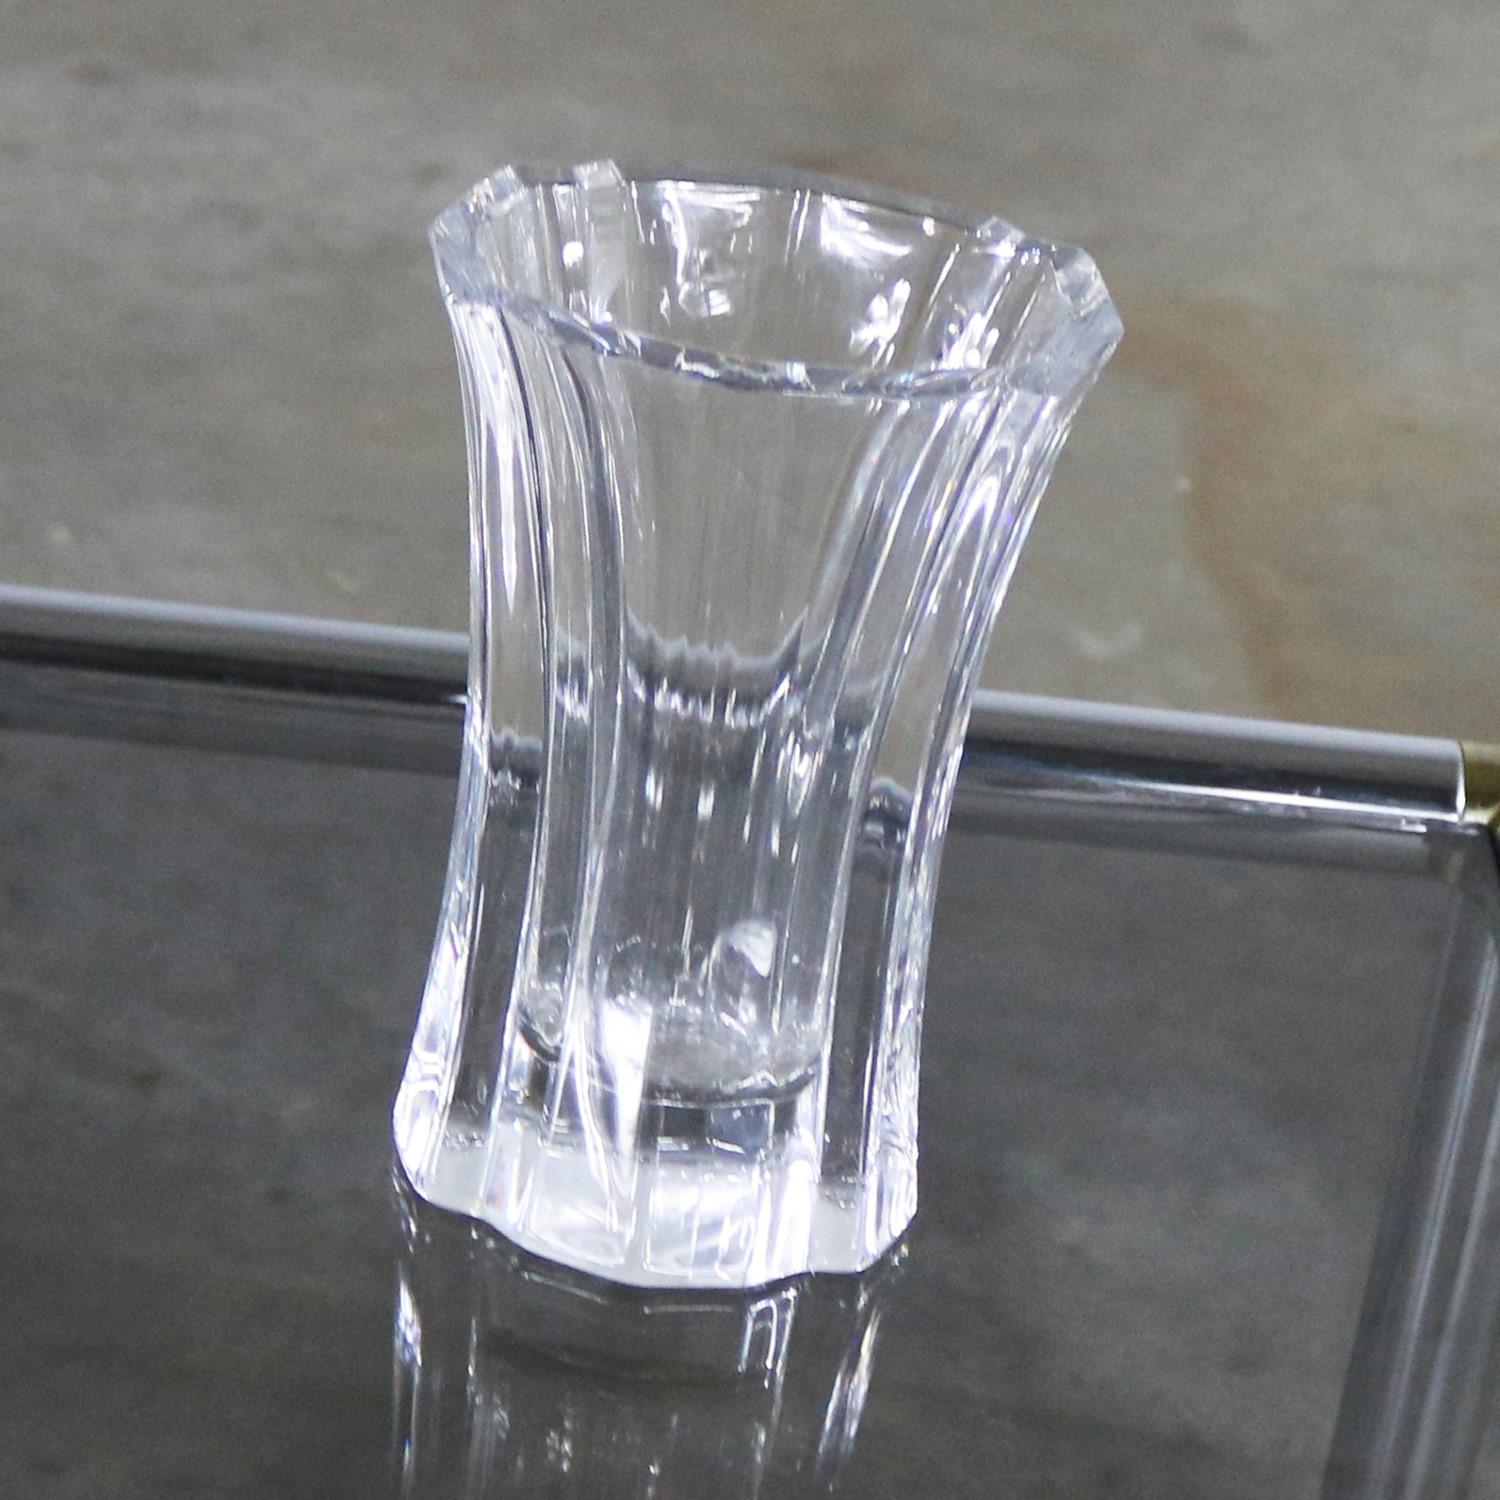 20th Century Orrefors Crystal Vase by Lars Hellsten Signed and Numbered LH 4599-22